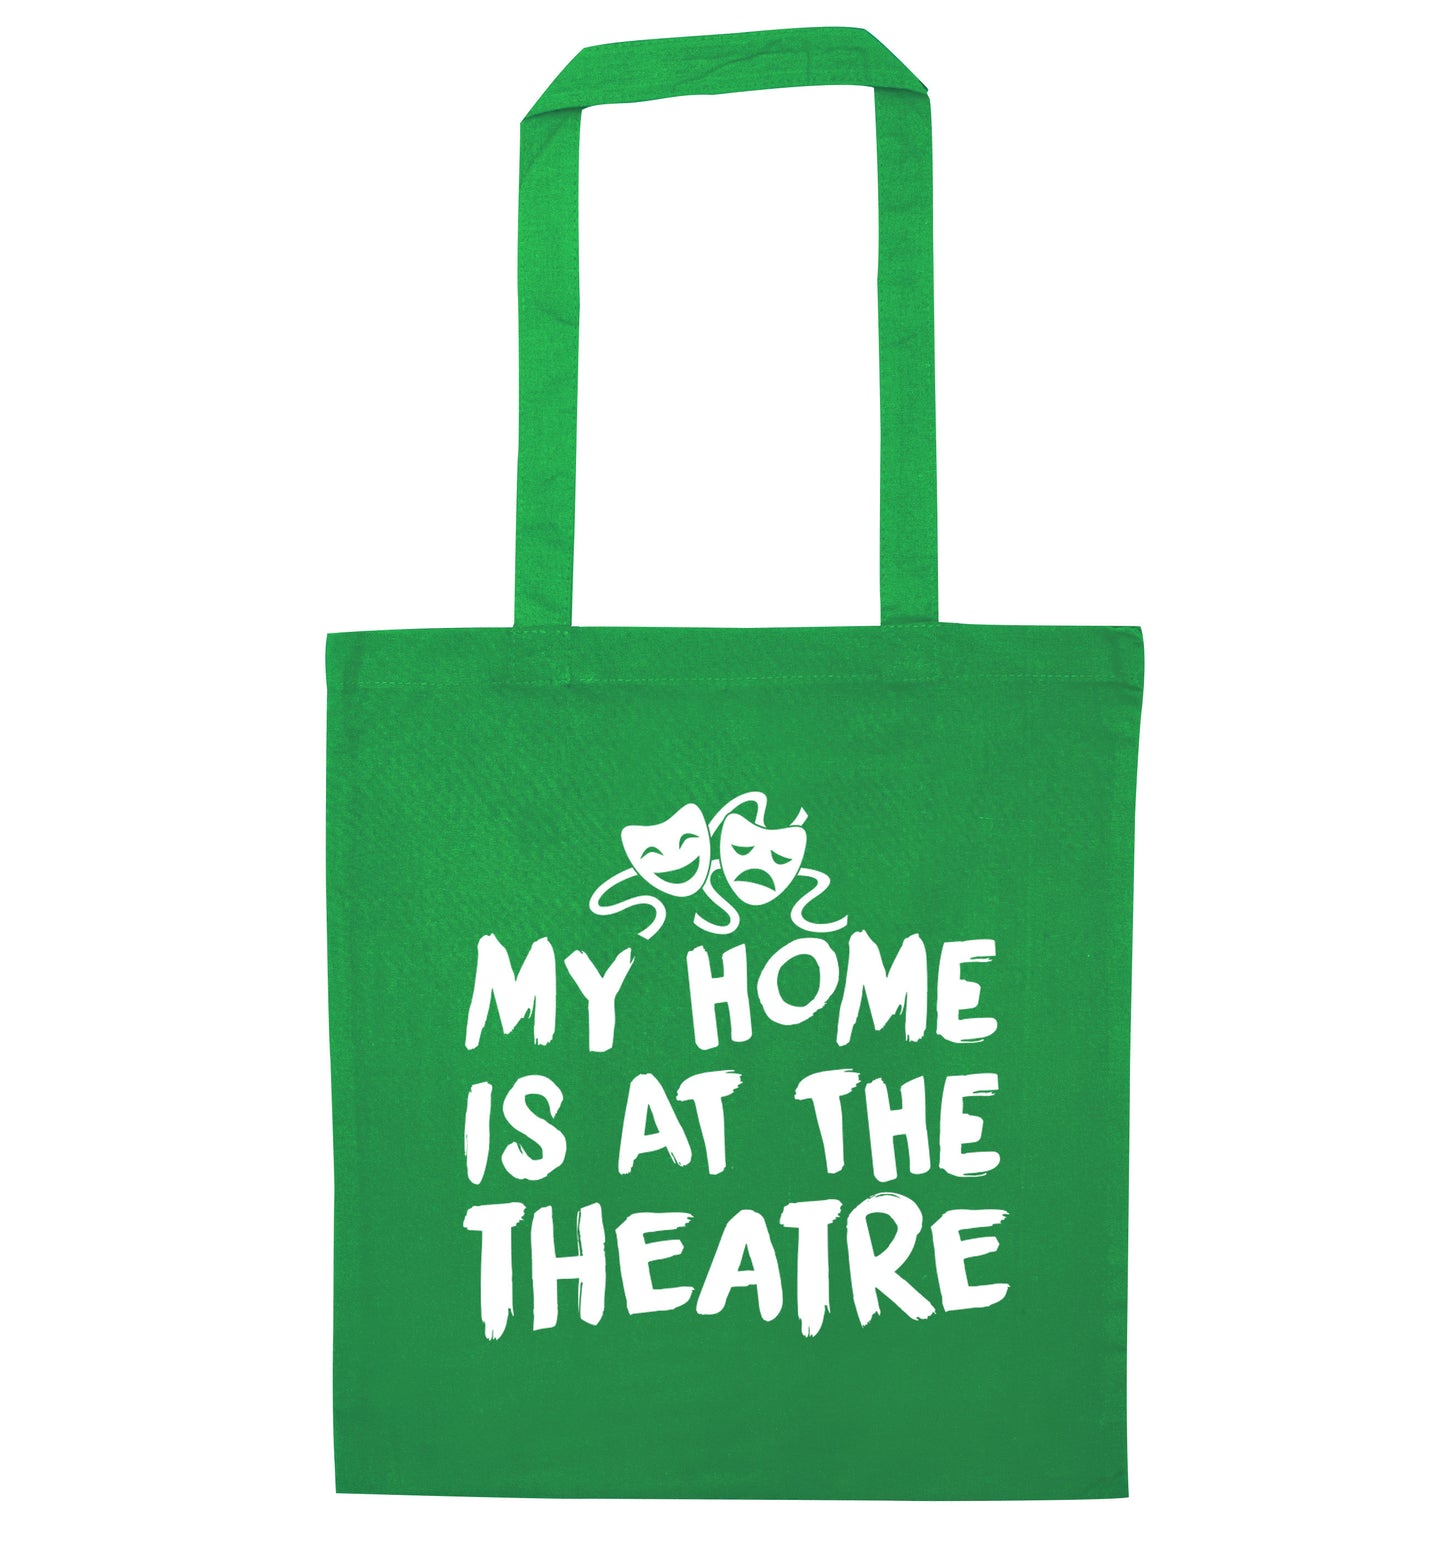 My home is at the theatre green tote bag